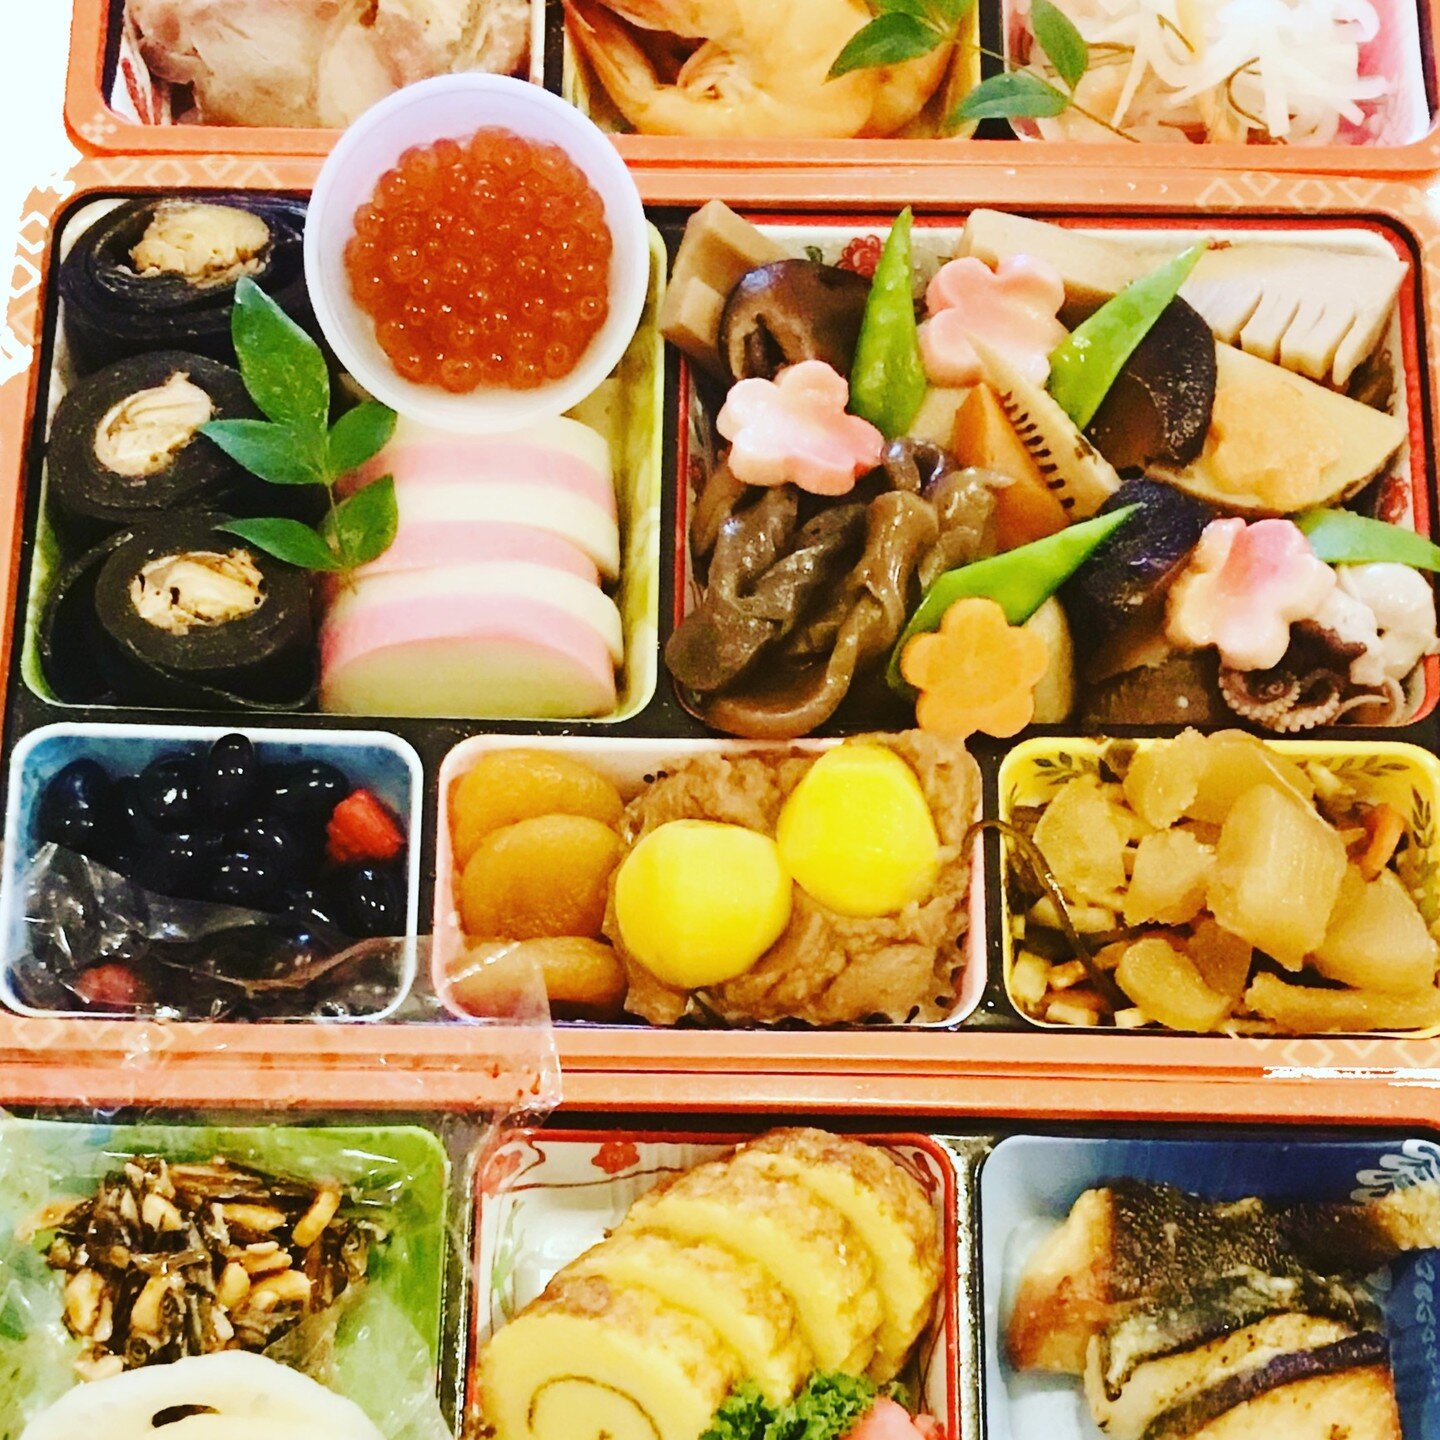 We are accepting Osechi 2023 order now! Please check our website gakyudc.com